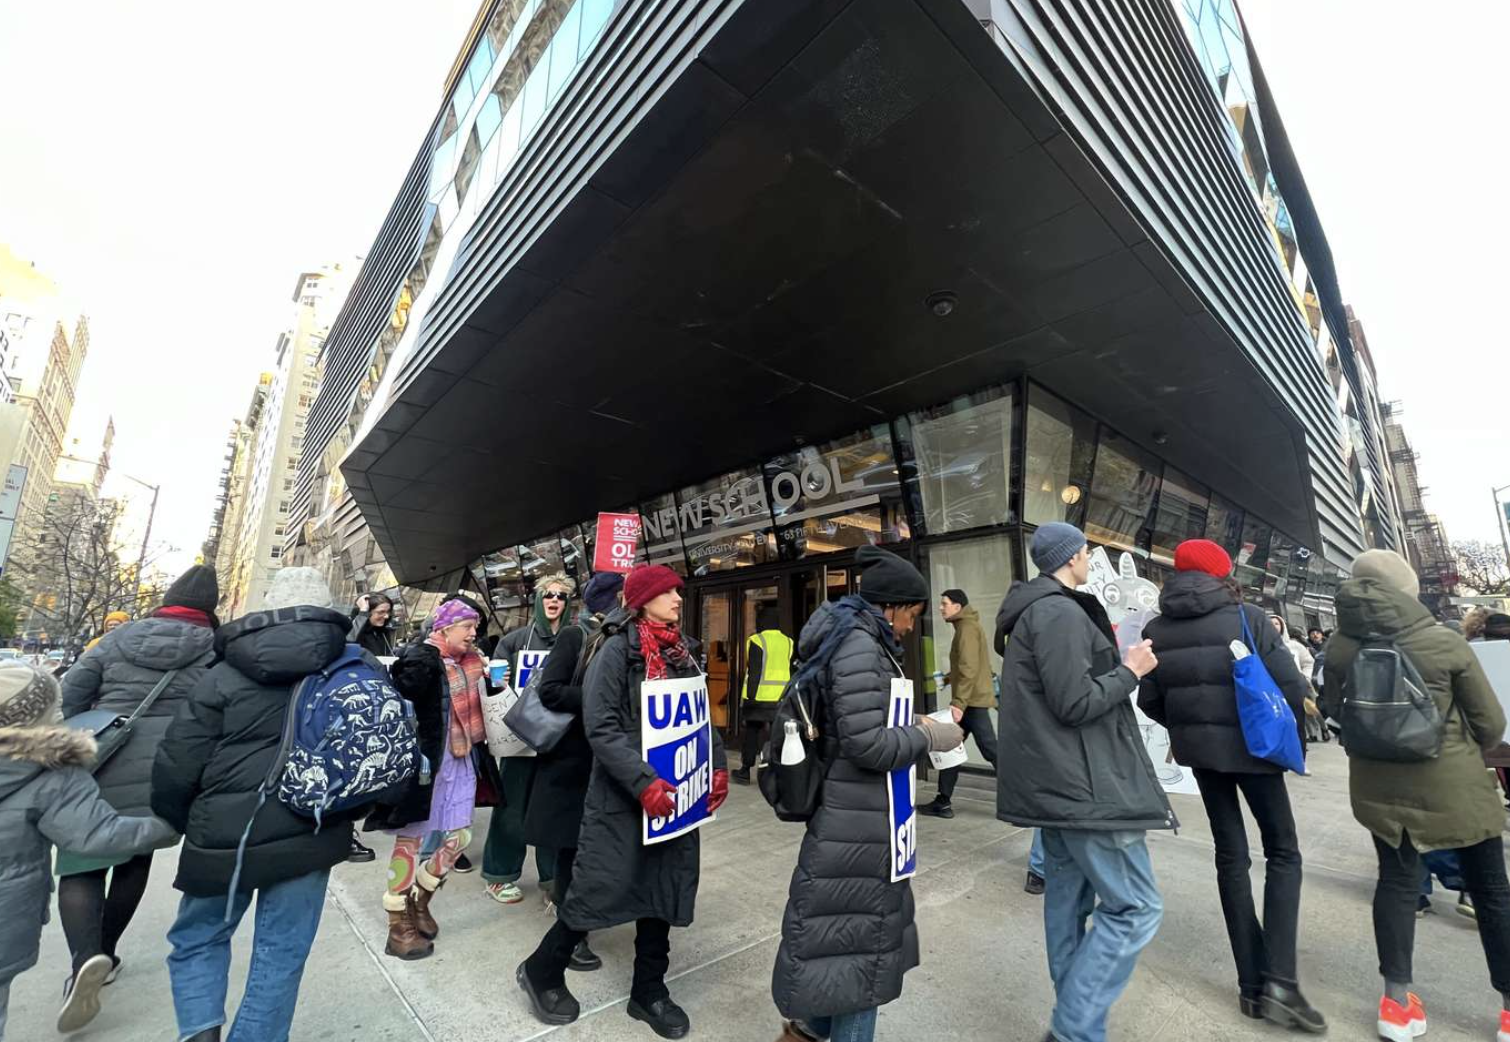 New School teachers’ strike ends as NYC university agrees to first pay raises in 4 years